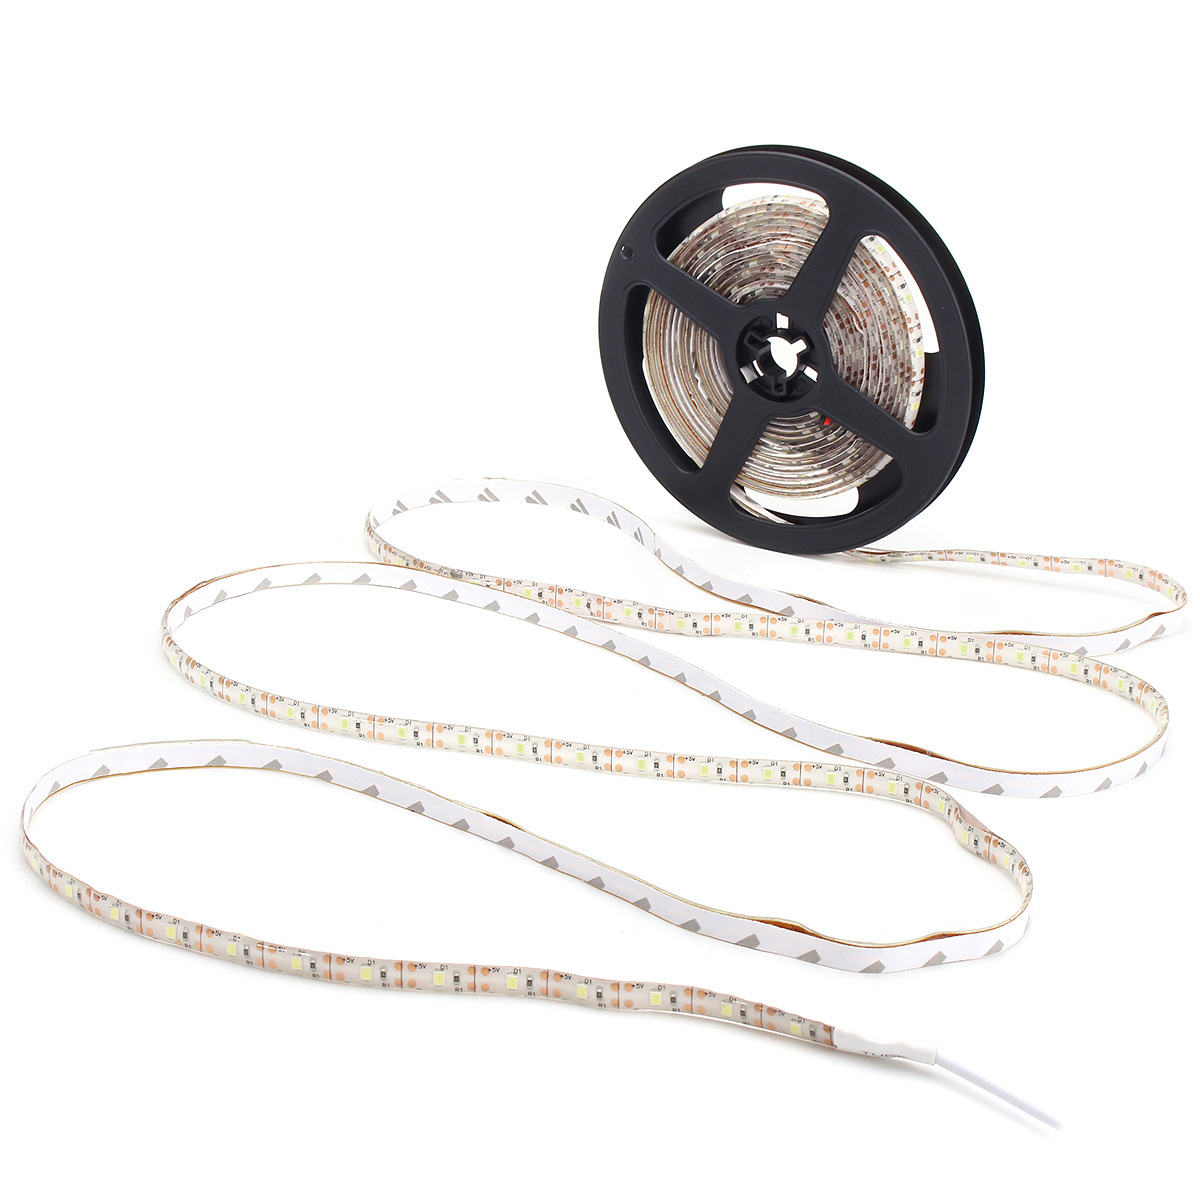 DC5V-5M-USB-2835-SMD-Pure-White-Warm-White-Red-Blue-Waterproof-LED-Strip-TV-Backlight-1212510-2